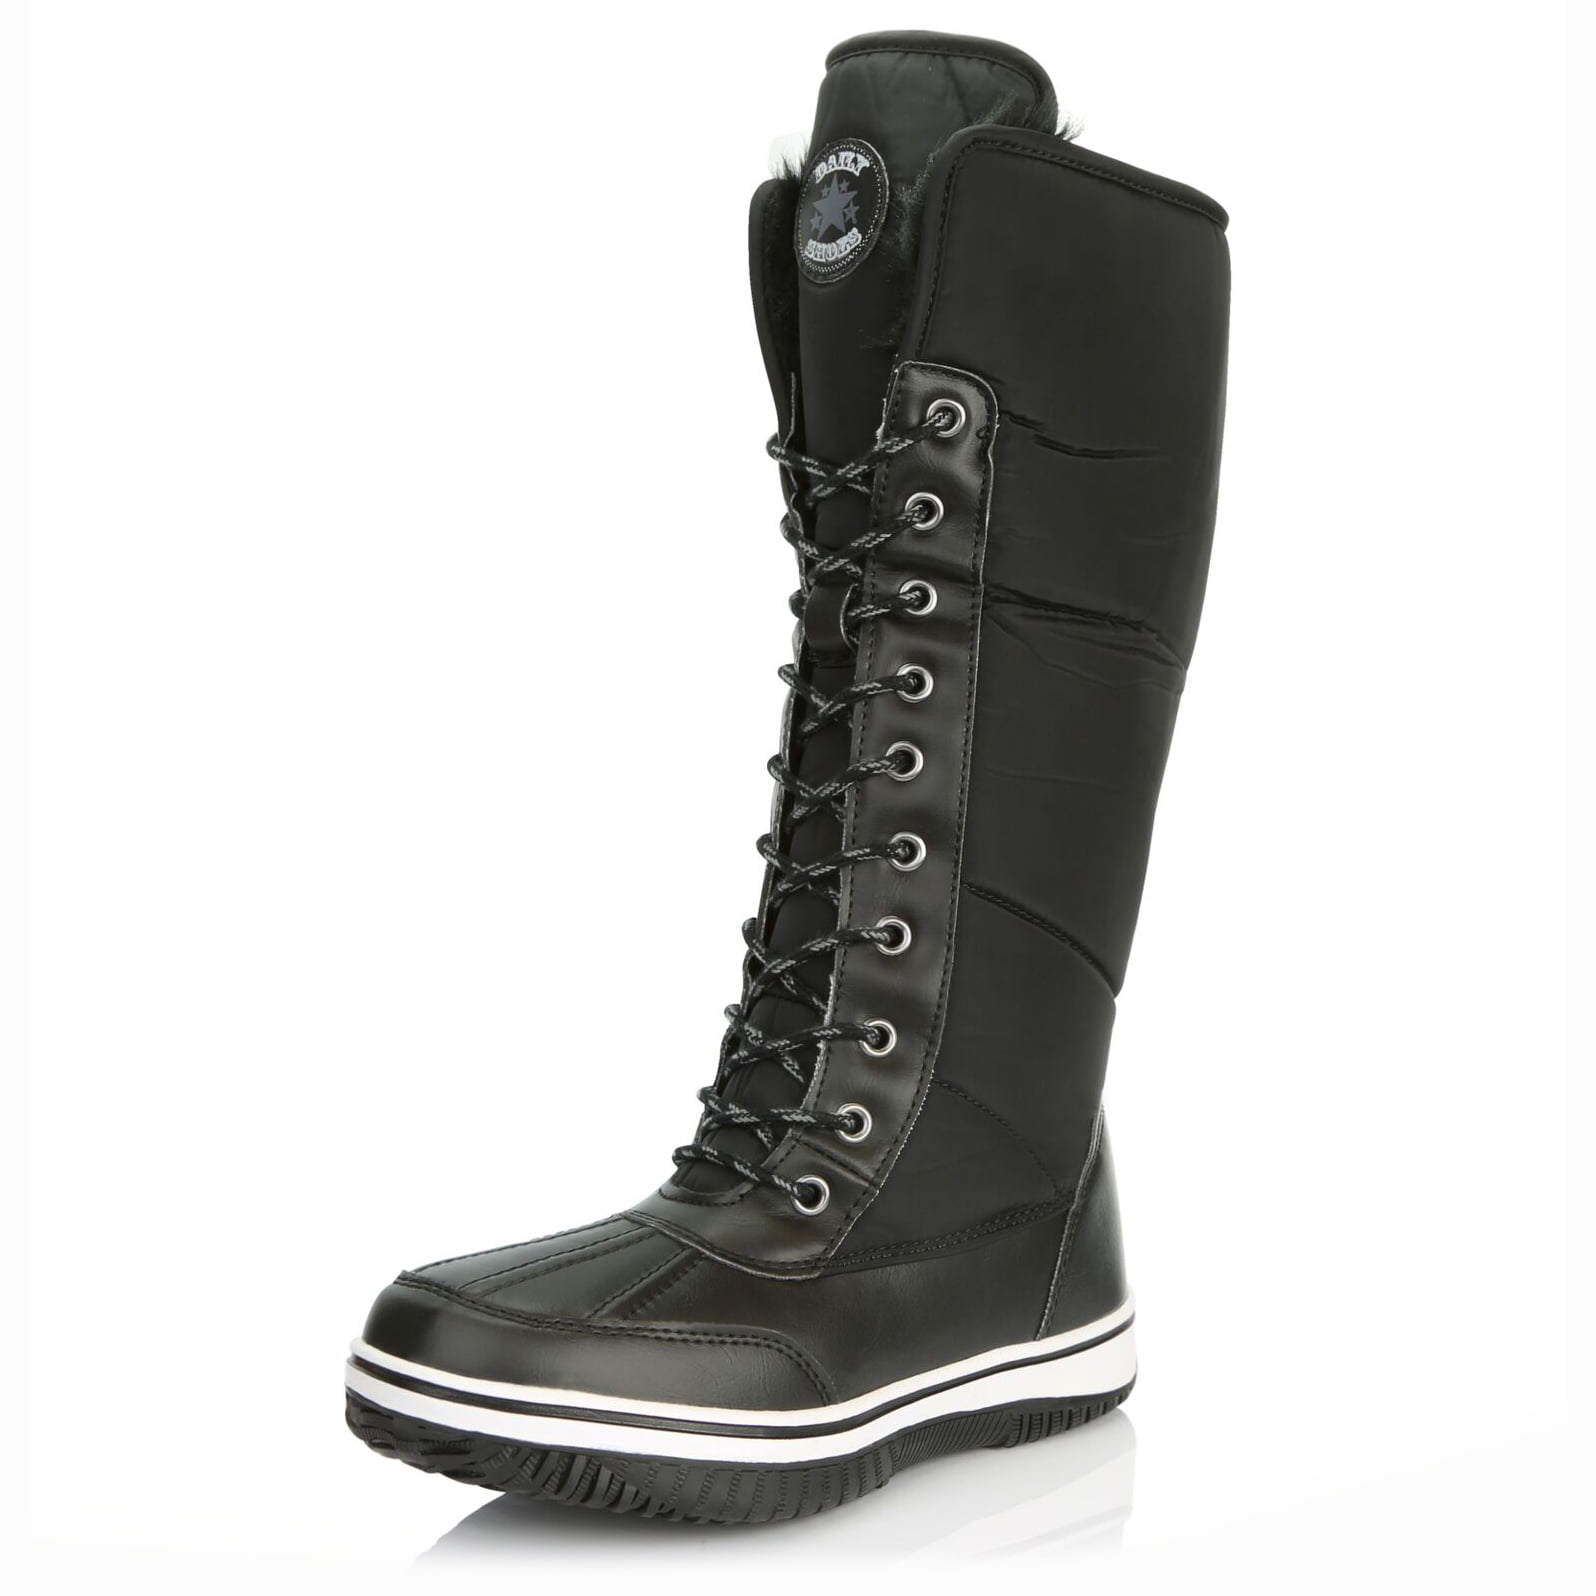 womens insulated rubber winter boots